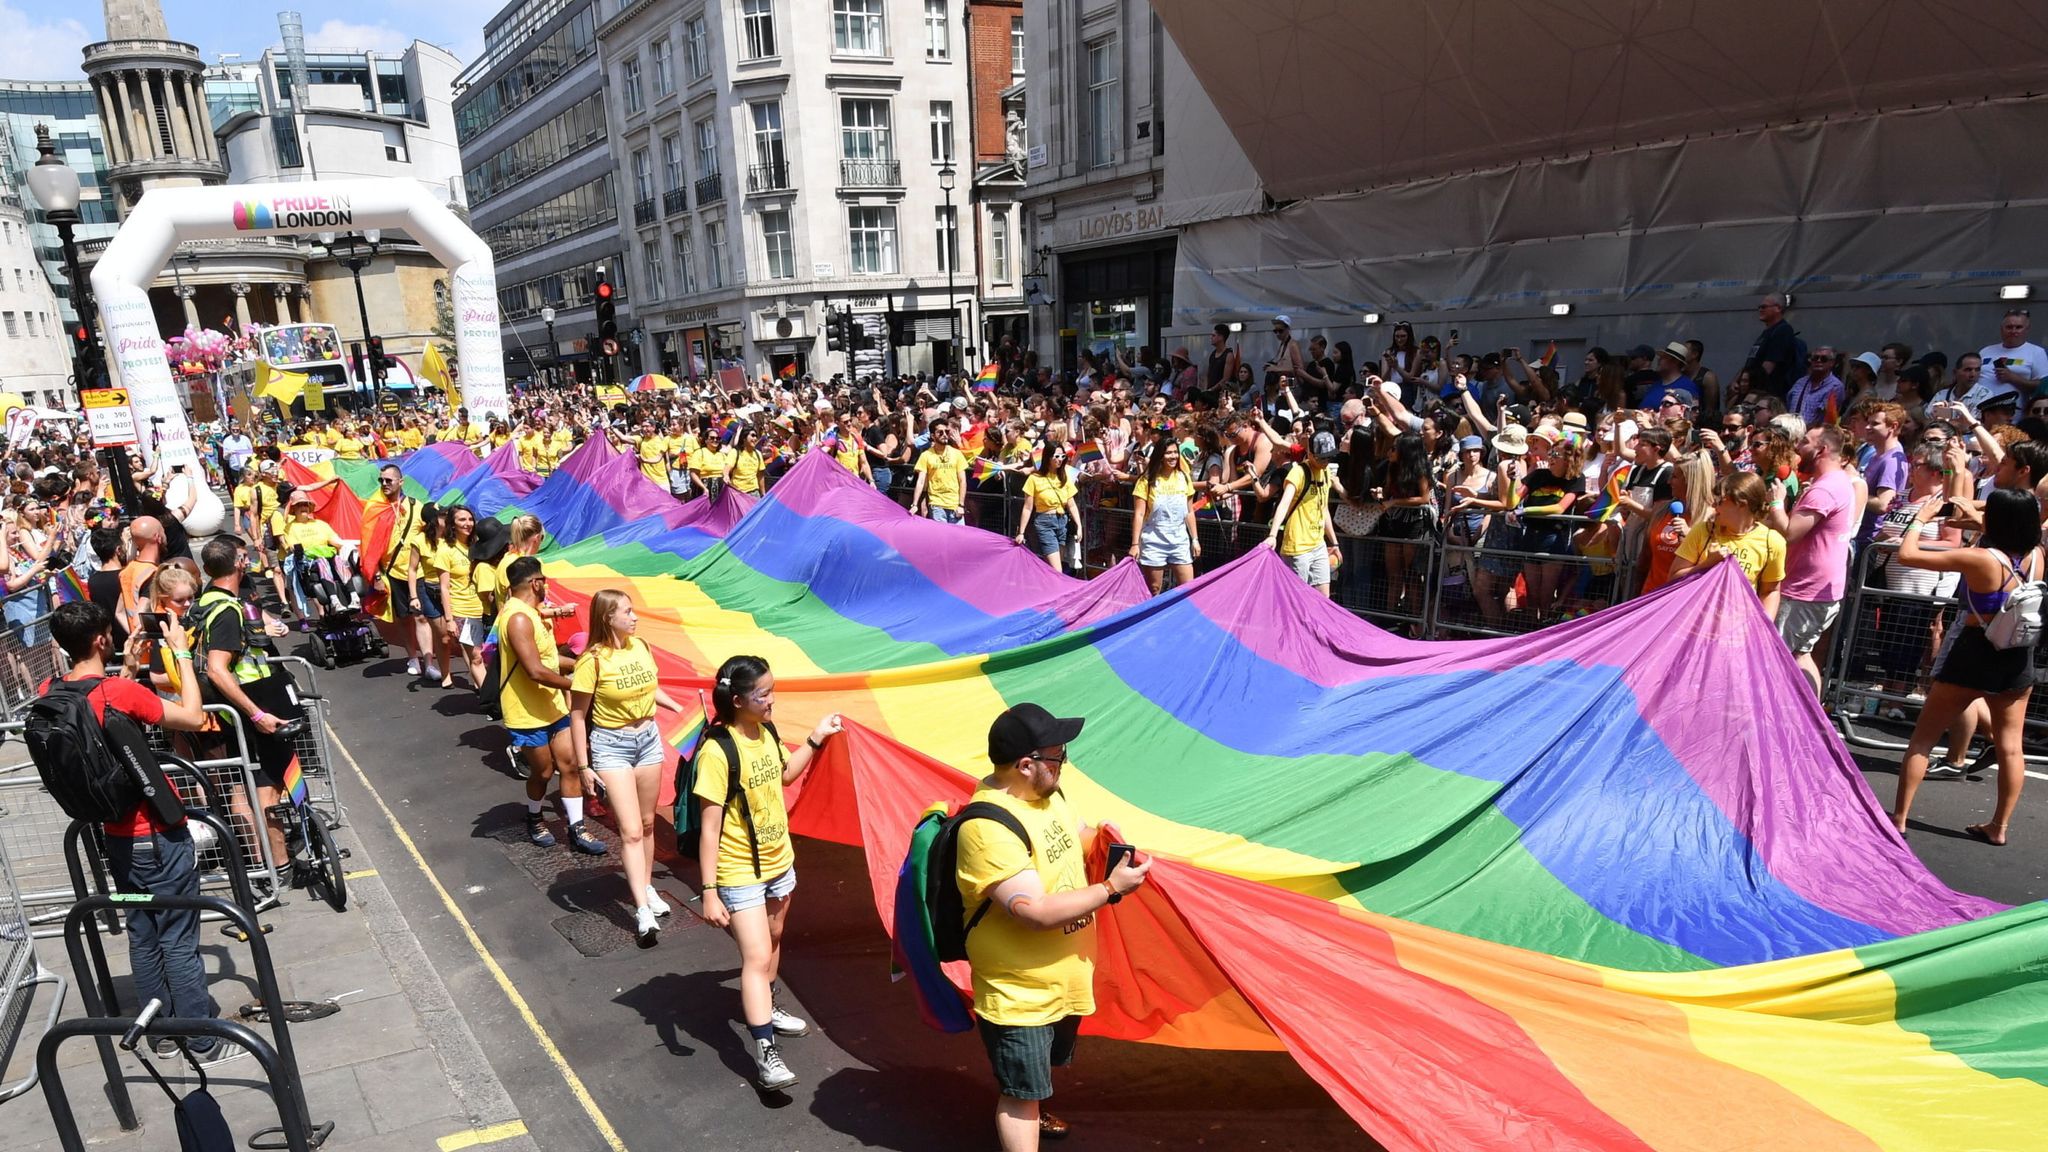 London Pride More than a million turn out to 'most diverse' parade